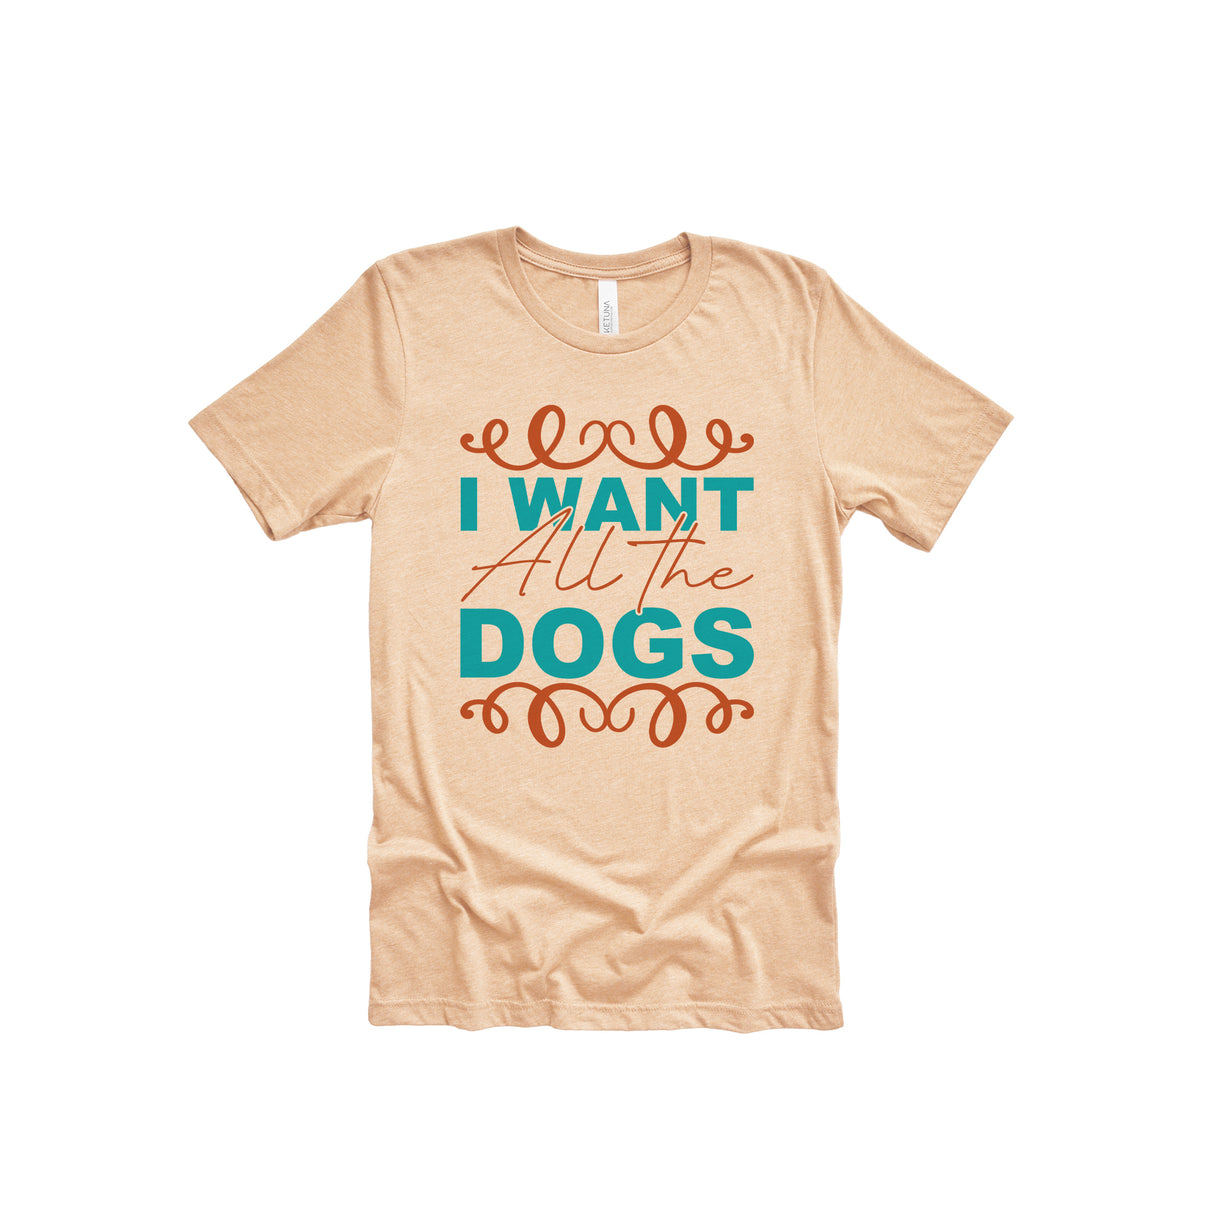 I Want All The Dogs Adult T-Shirt